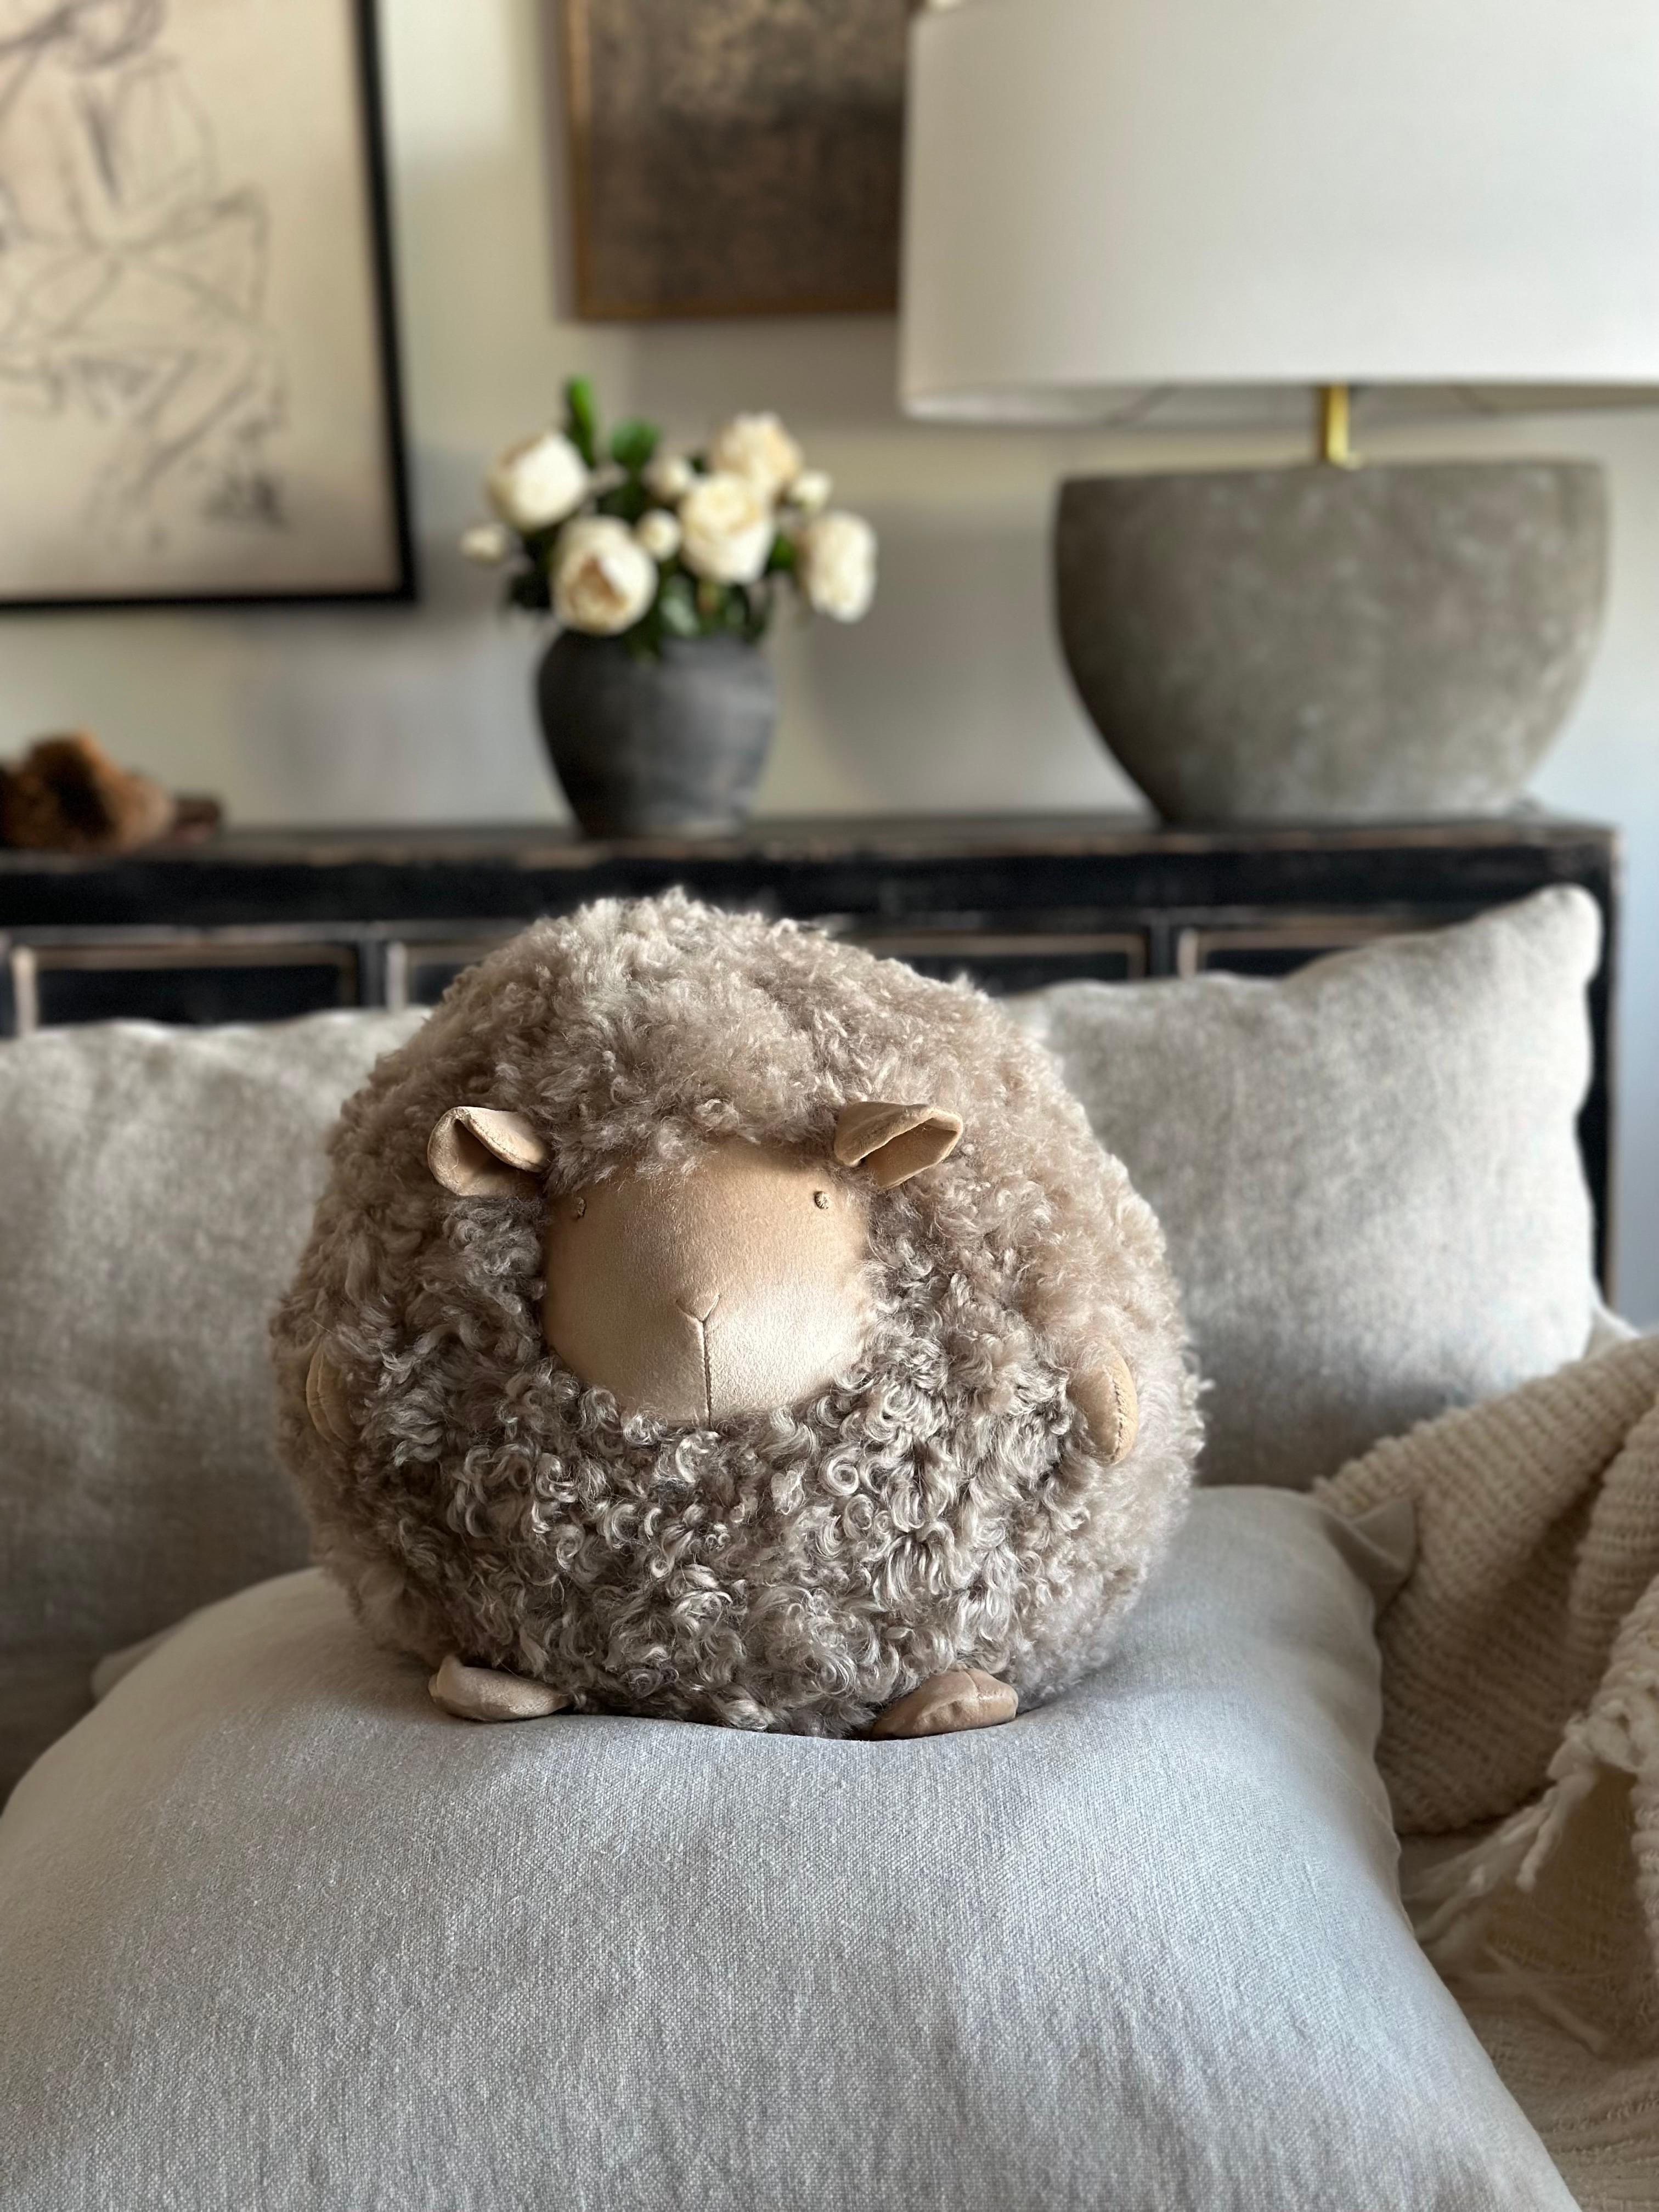 Custom Sherpa Lambs Wool Pillow
Round with cute embroidered face, feet and tail.
12